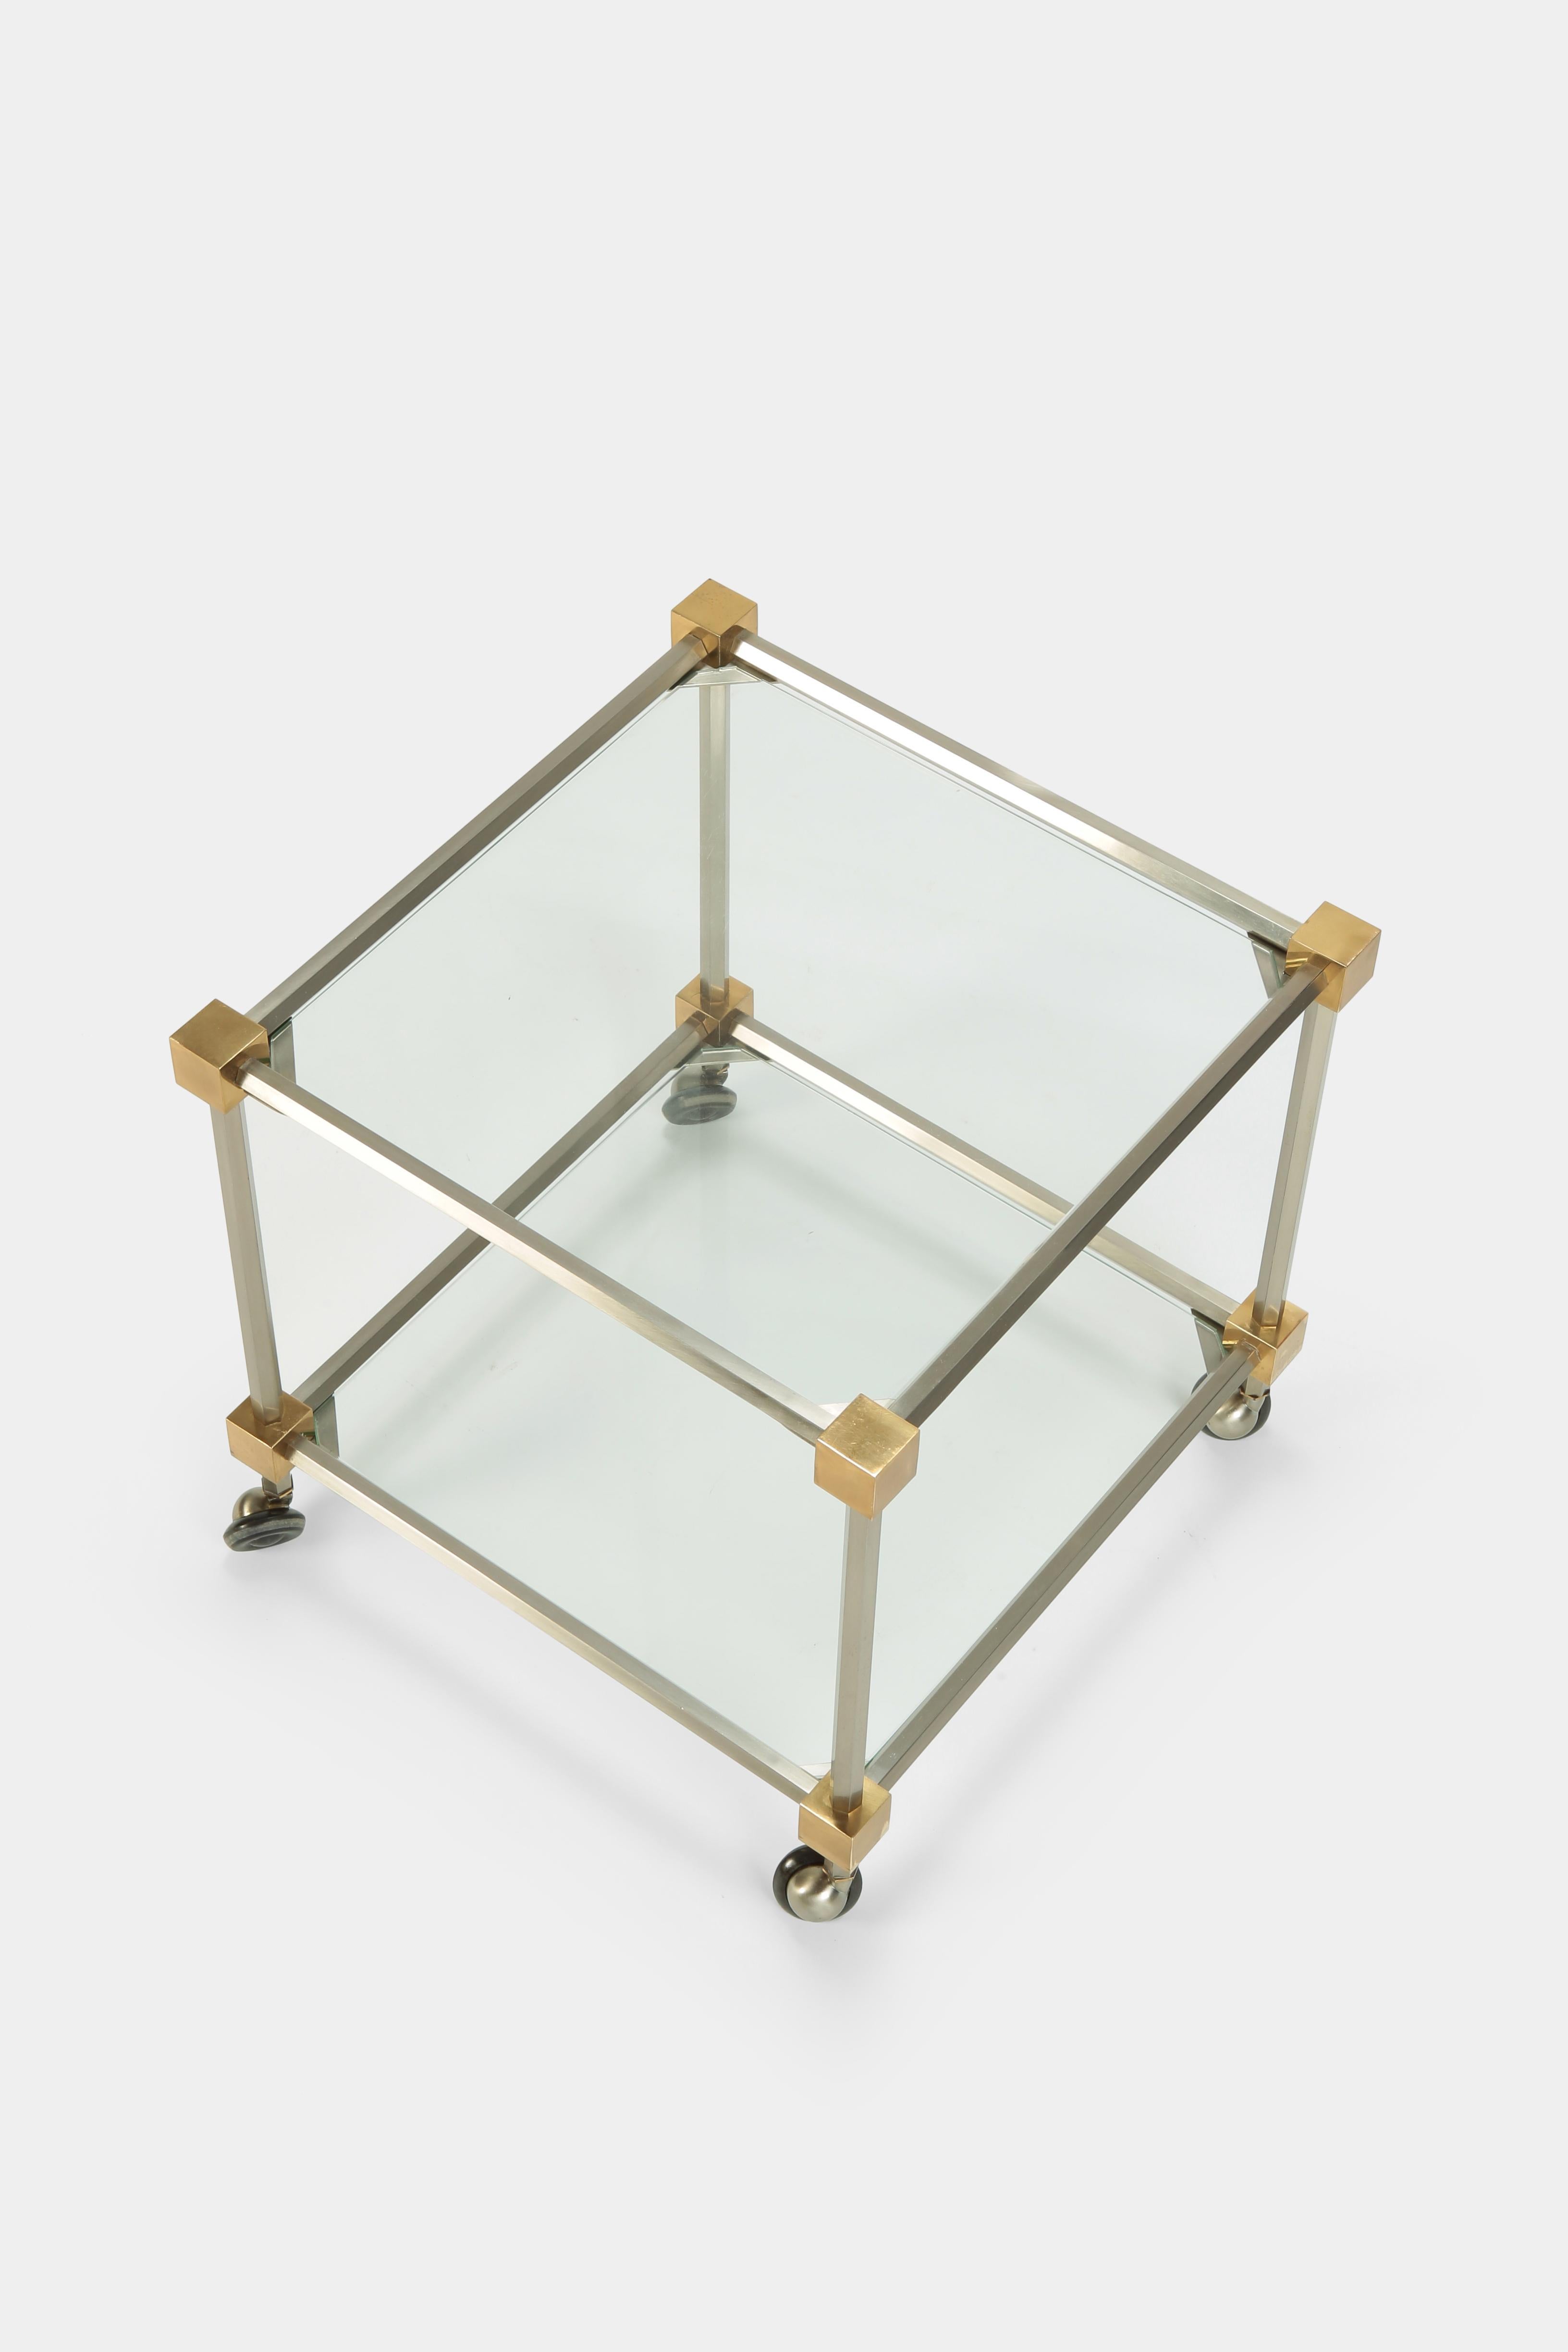 Maison Jansen side table manufactured by Maison Jansen in the 1970s in France. The frame is made of chrome steel with corner partes made of solid brass. Stands on wheels.